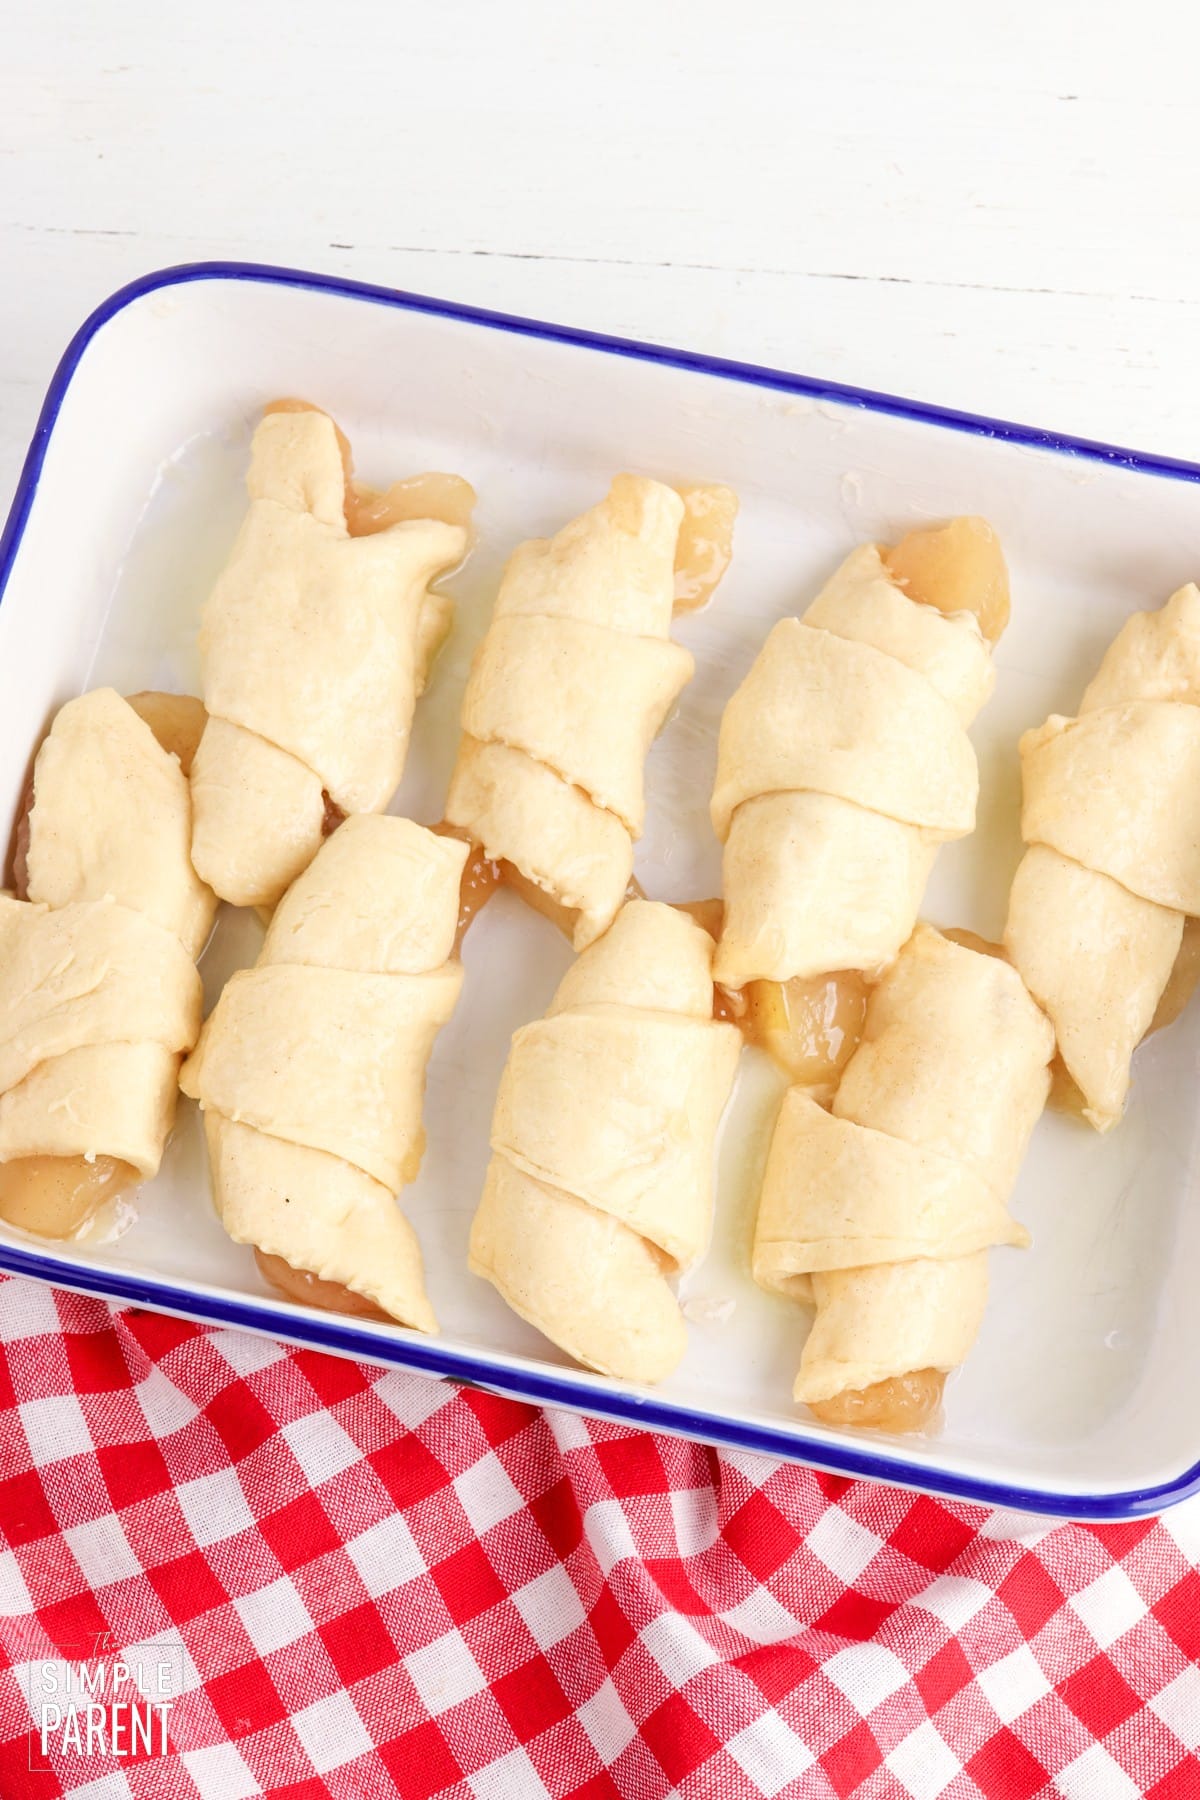 Baking dish with uncooked apple turnovers